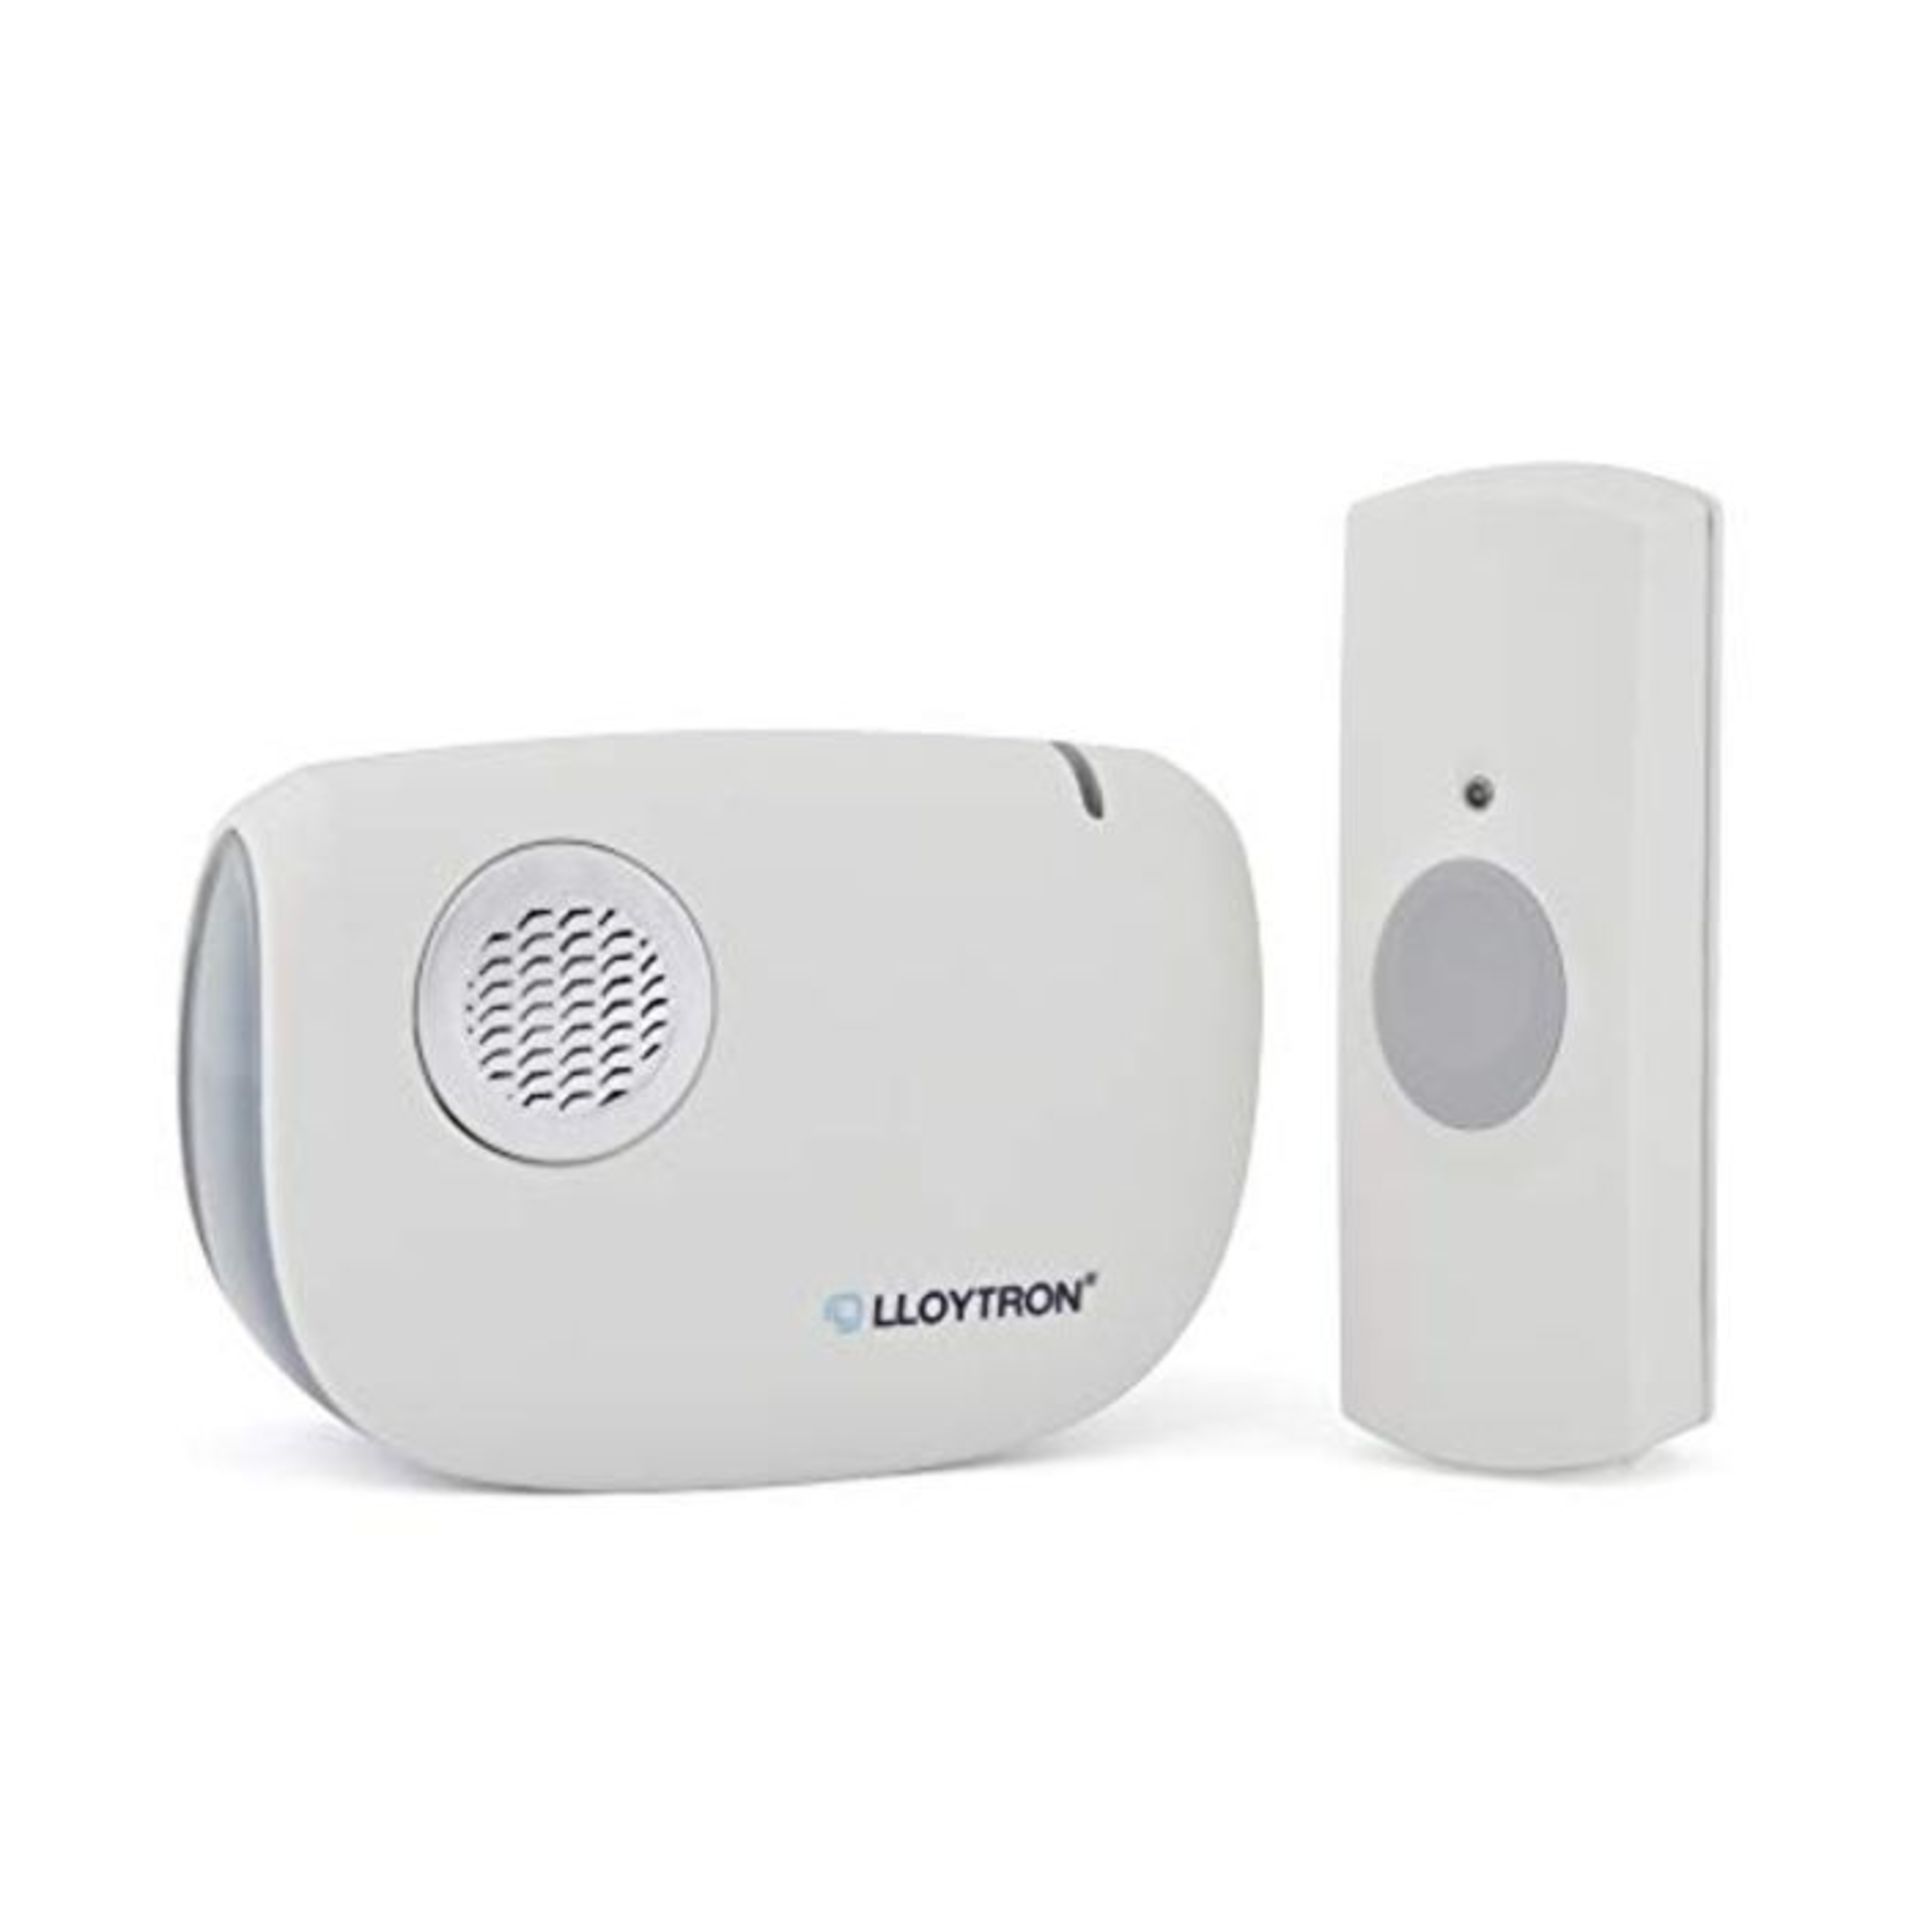 LLOYTRON® MIP System 3 Doorbell Kit with Battery Operated Chime Receiver and Bell Pus